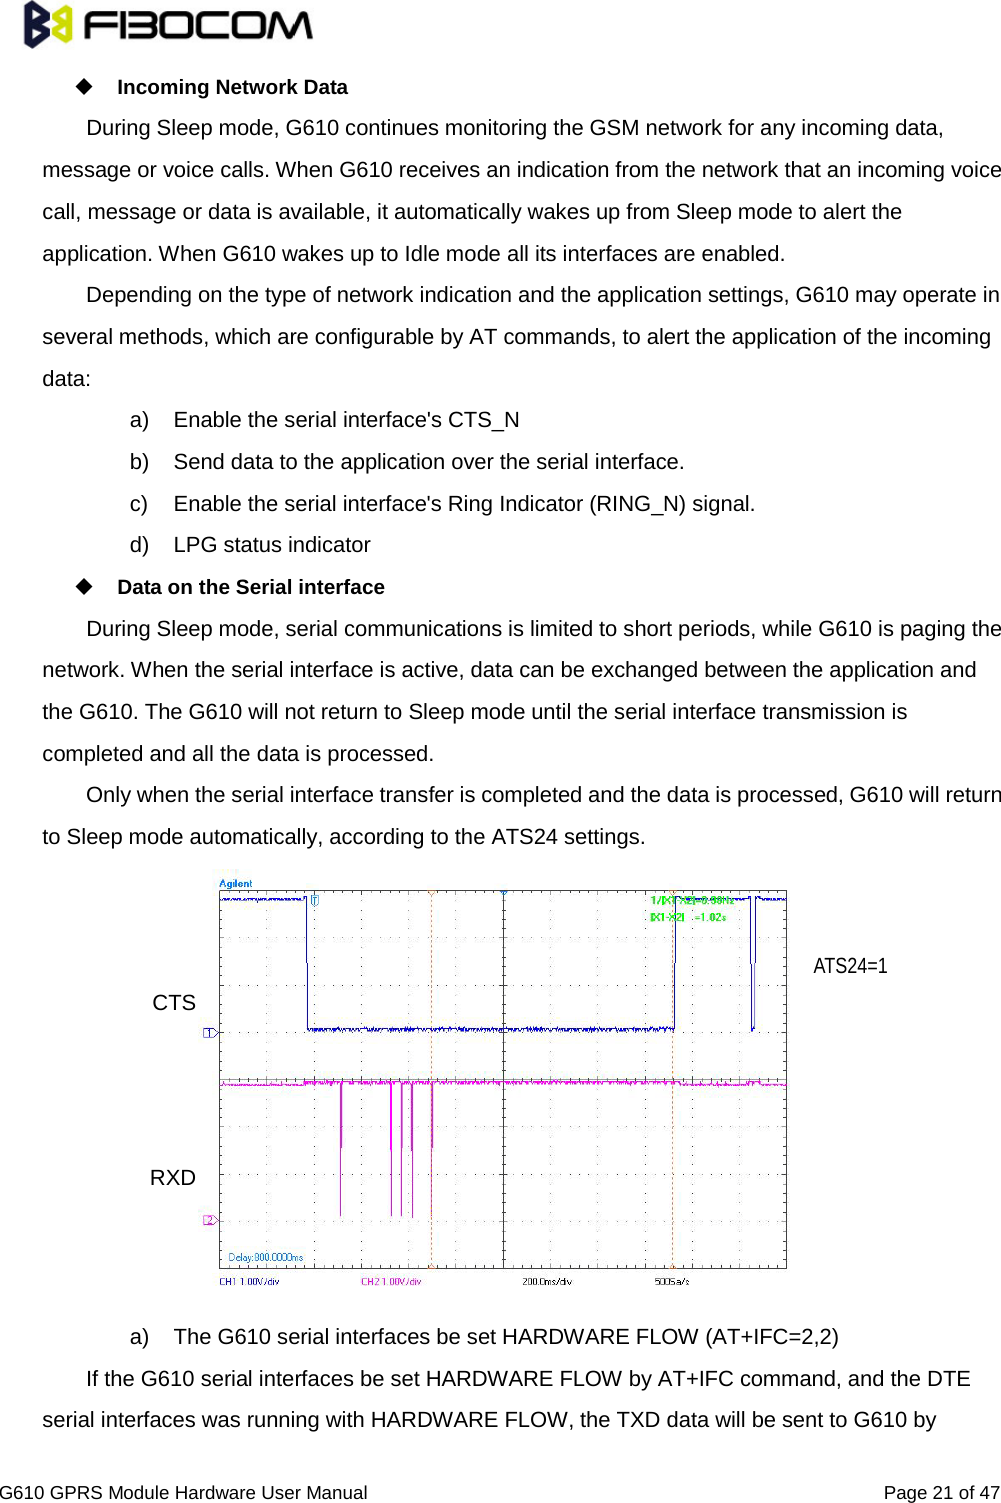                                                                                                          G610 GPRS Module Hardware User Manual                                                          Page 21 of 47   Incoming Network Data   During Sleep mode, G610 continues monitoring the GSM network for any incoming data, message or voice calls. When G610 receives an indication from the network that an incoming voice call, message or data is available, it automatically wakes up from Sleep mode to alert the application. When G610 wakes up to Idle mode all its interfaces are enabled.   Depending on the type of network indication and the application settings, G610 may operate in several methods, which are configurable by AT commands, to alert the application of the incoming data:   a) Enable the serial interface&apos;s CTS_N b) Send data to the application over the serial interface.   c)  Enable the serial interface&apos;s Ring Indicator (RING_N) signal.   d) LPG status indicator  Data on the Serial interface   During Sleep mode, serial communications is limited to short periods, while G610 is paging the network. When the serial interface is active, data can be exchanged between the application and the G610. The G610 will not return to Sleep mode until the serial interface transmission is completed and all the data is processed.   Only when the serial interface transfer is completed and the data is processed, G610 will return to Sleep mode automatically, according to the ATS24 settings.              a) The G610 serial interfaces be set HARDWARE FLOW (AT+IFC=2,2) If the G610 serial interfaces be set HARDWARE FLOW by AT+IFC command, and the DTE serial interfaces was running with HARDWARE FLOW, the TXD data will be sent to G610 by RXD CTS ATS24=1 